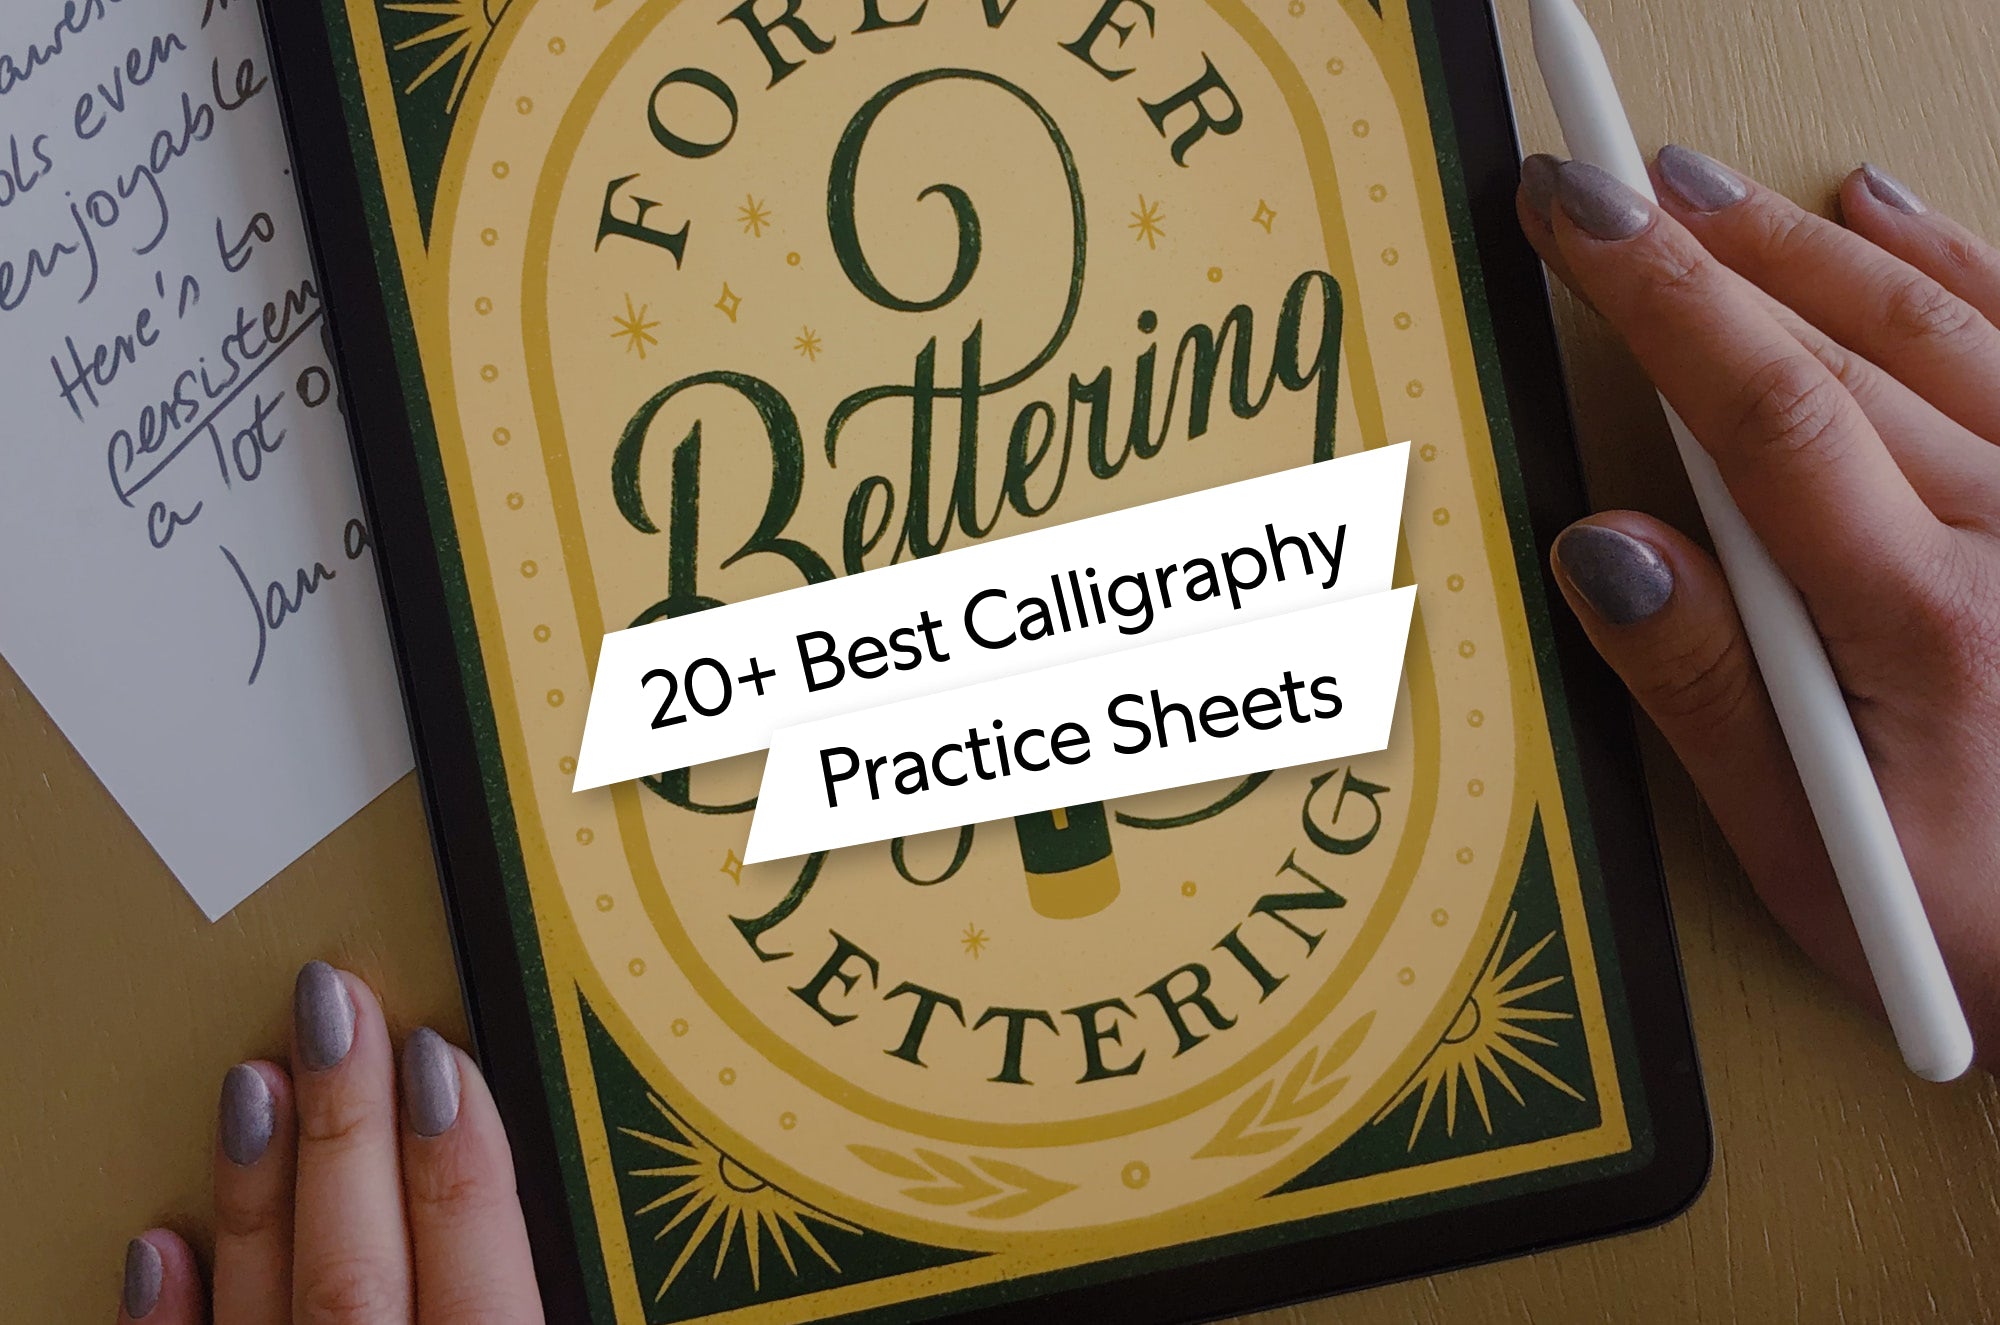 Calligraphy and Hand Lettering for Beginners: An Interactive Calligraphy & Lettering  Workbook With Guides, Instructions, Drills, Practice Pages & More  (Hardcover)